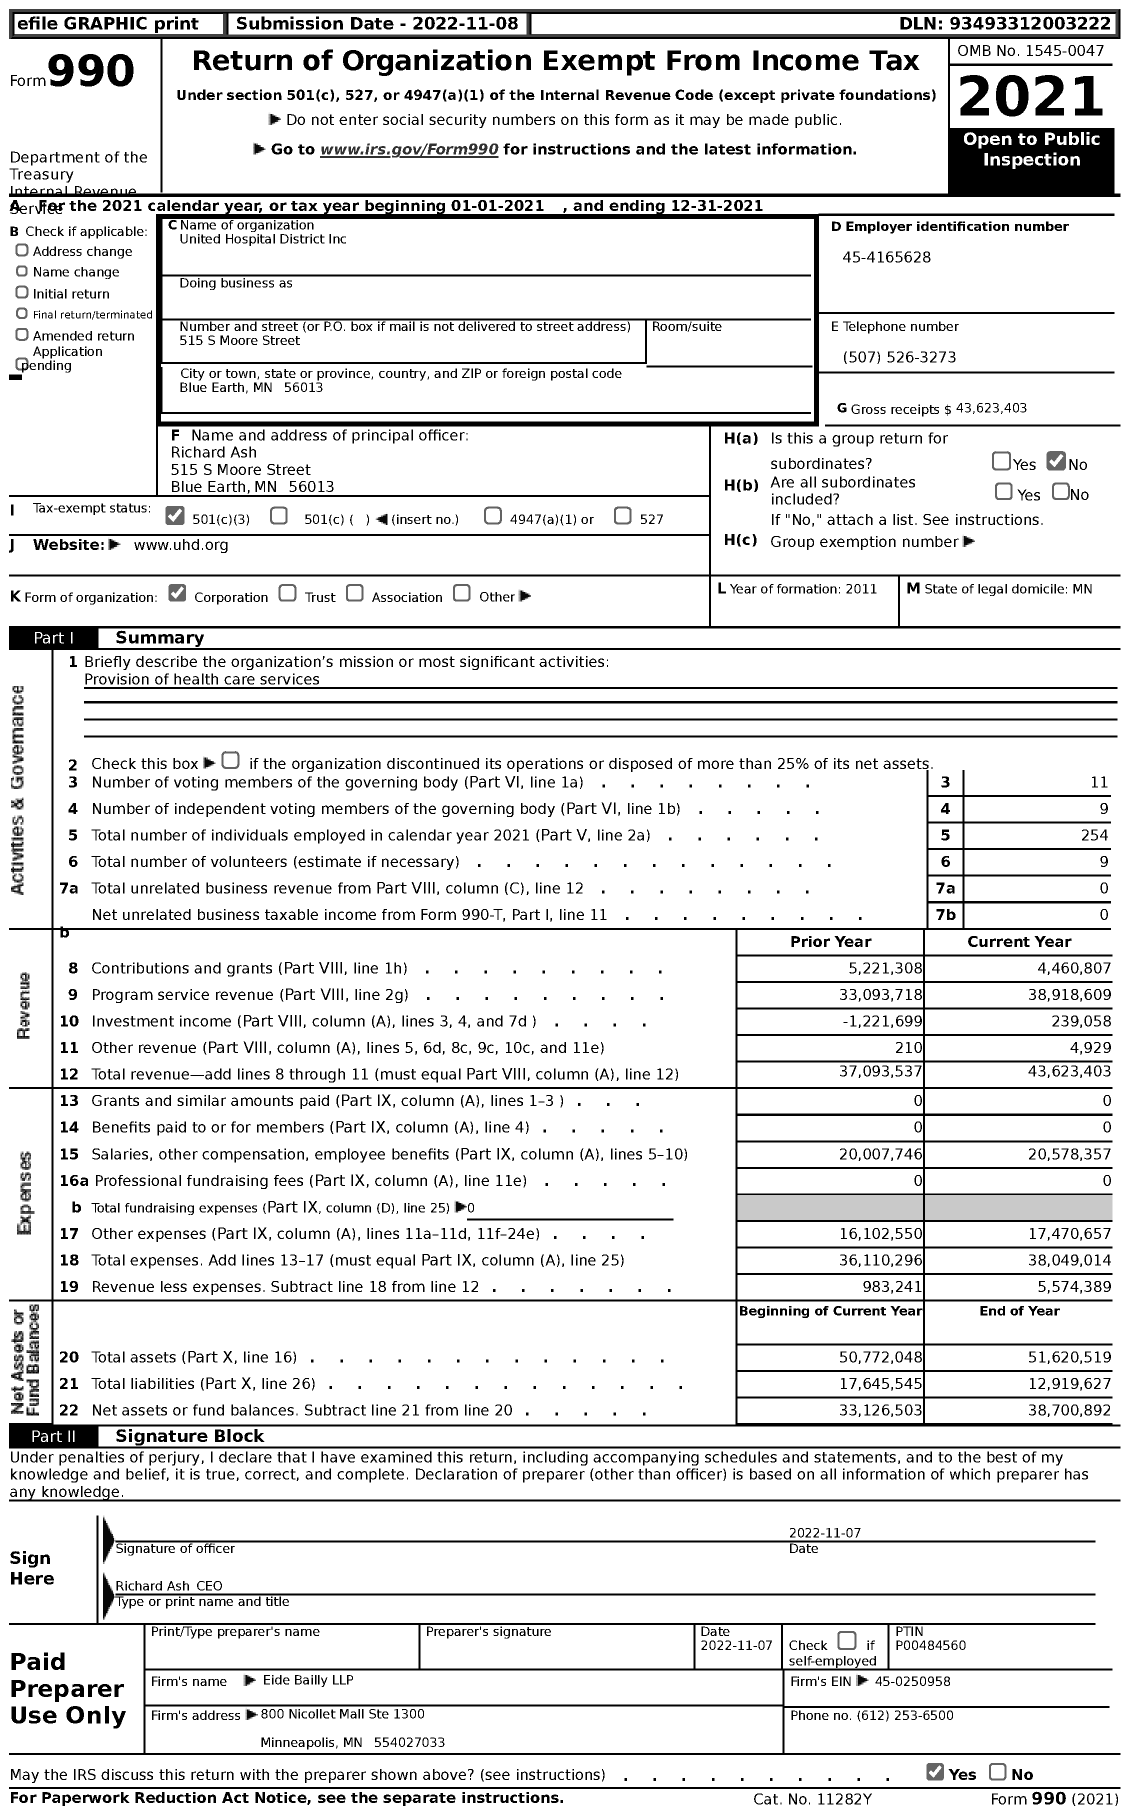 Image of first page of 2021 Form 990 for United Hospital District (UHD)